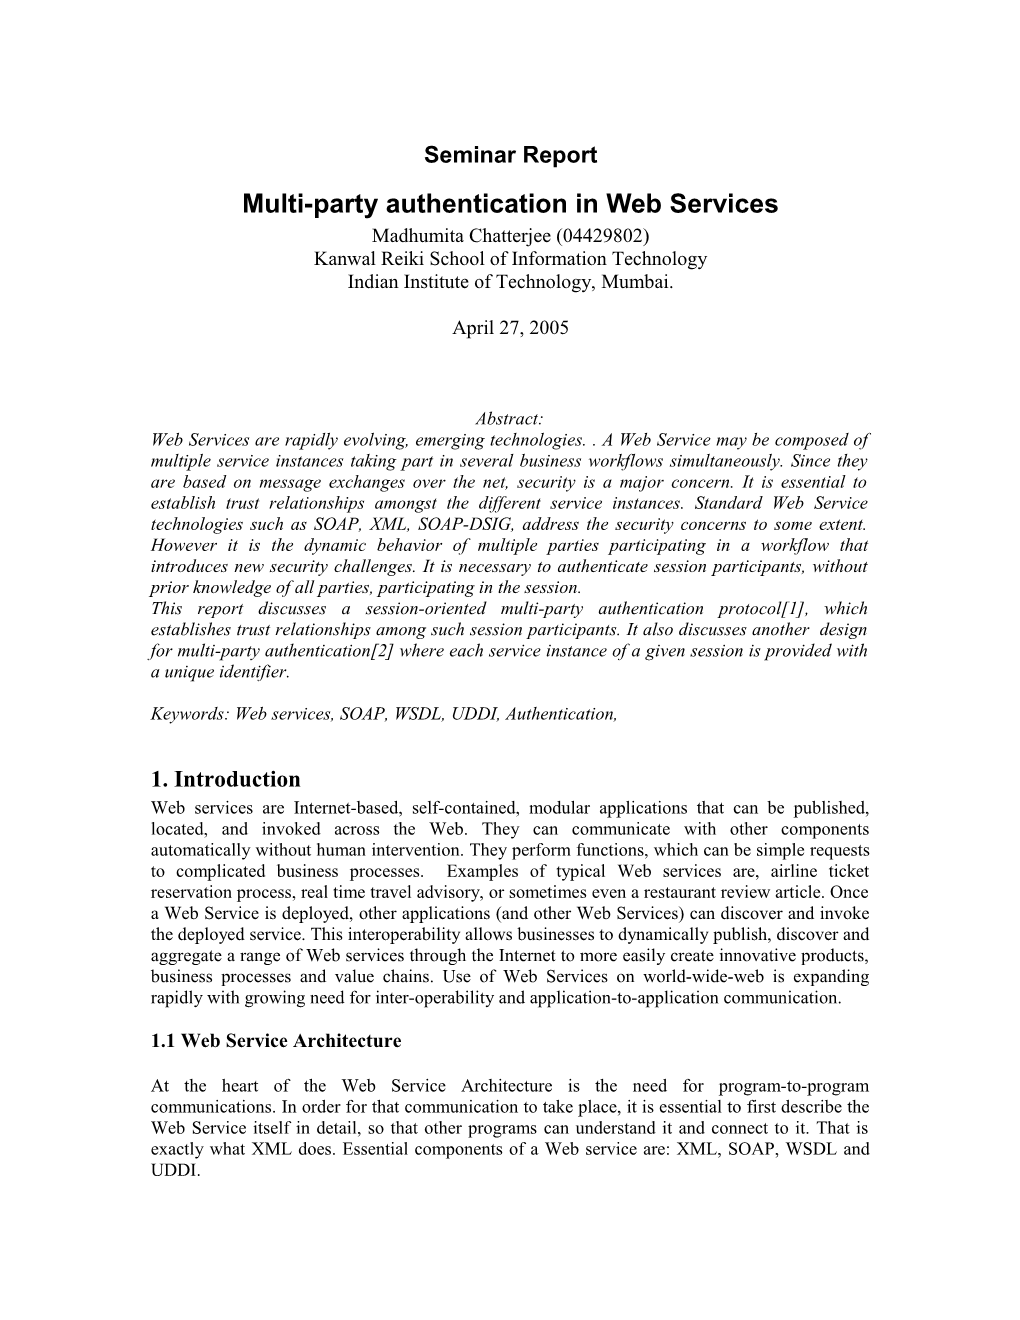 Multi-Party Authentication in Web Services